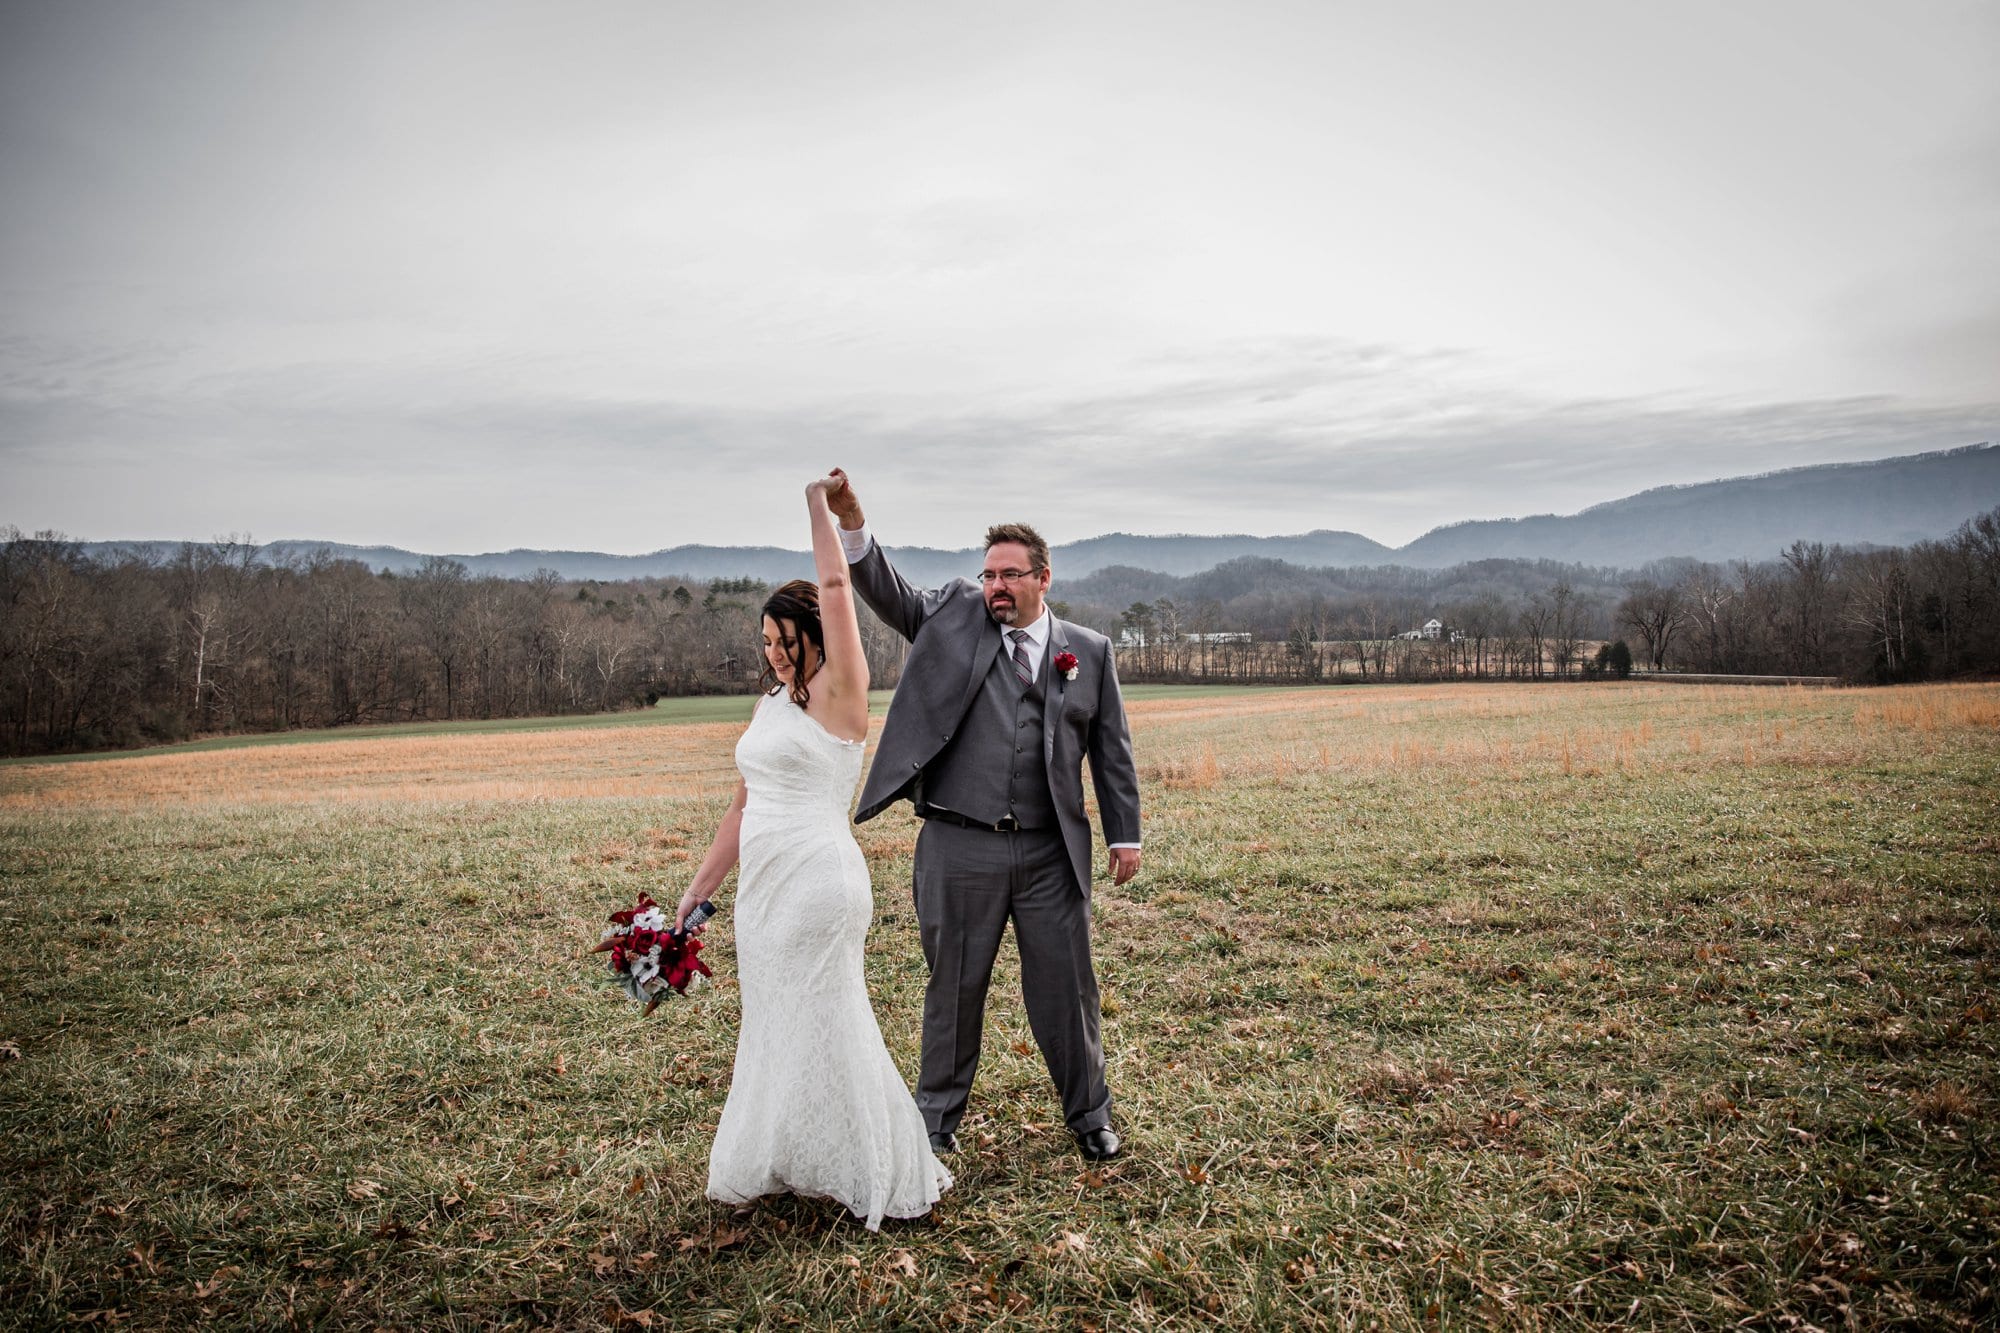 Dancing in front of the mountains at smoky mountain wedding